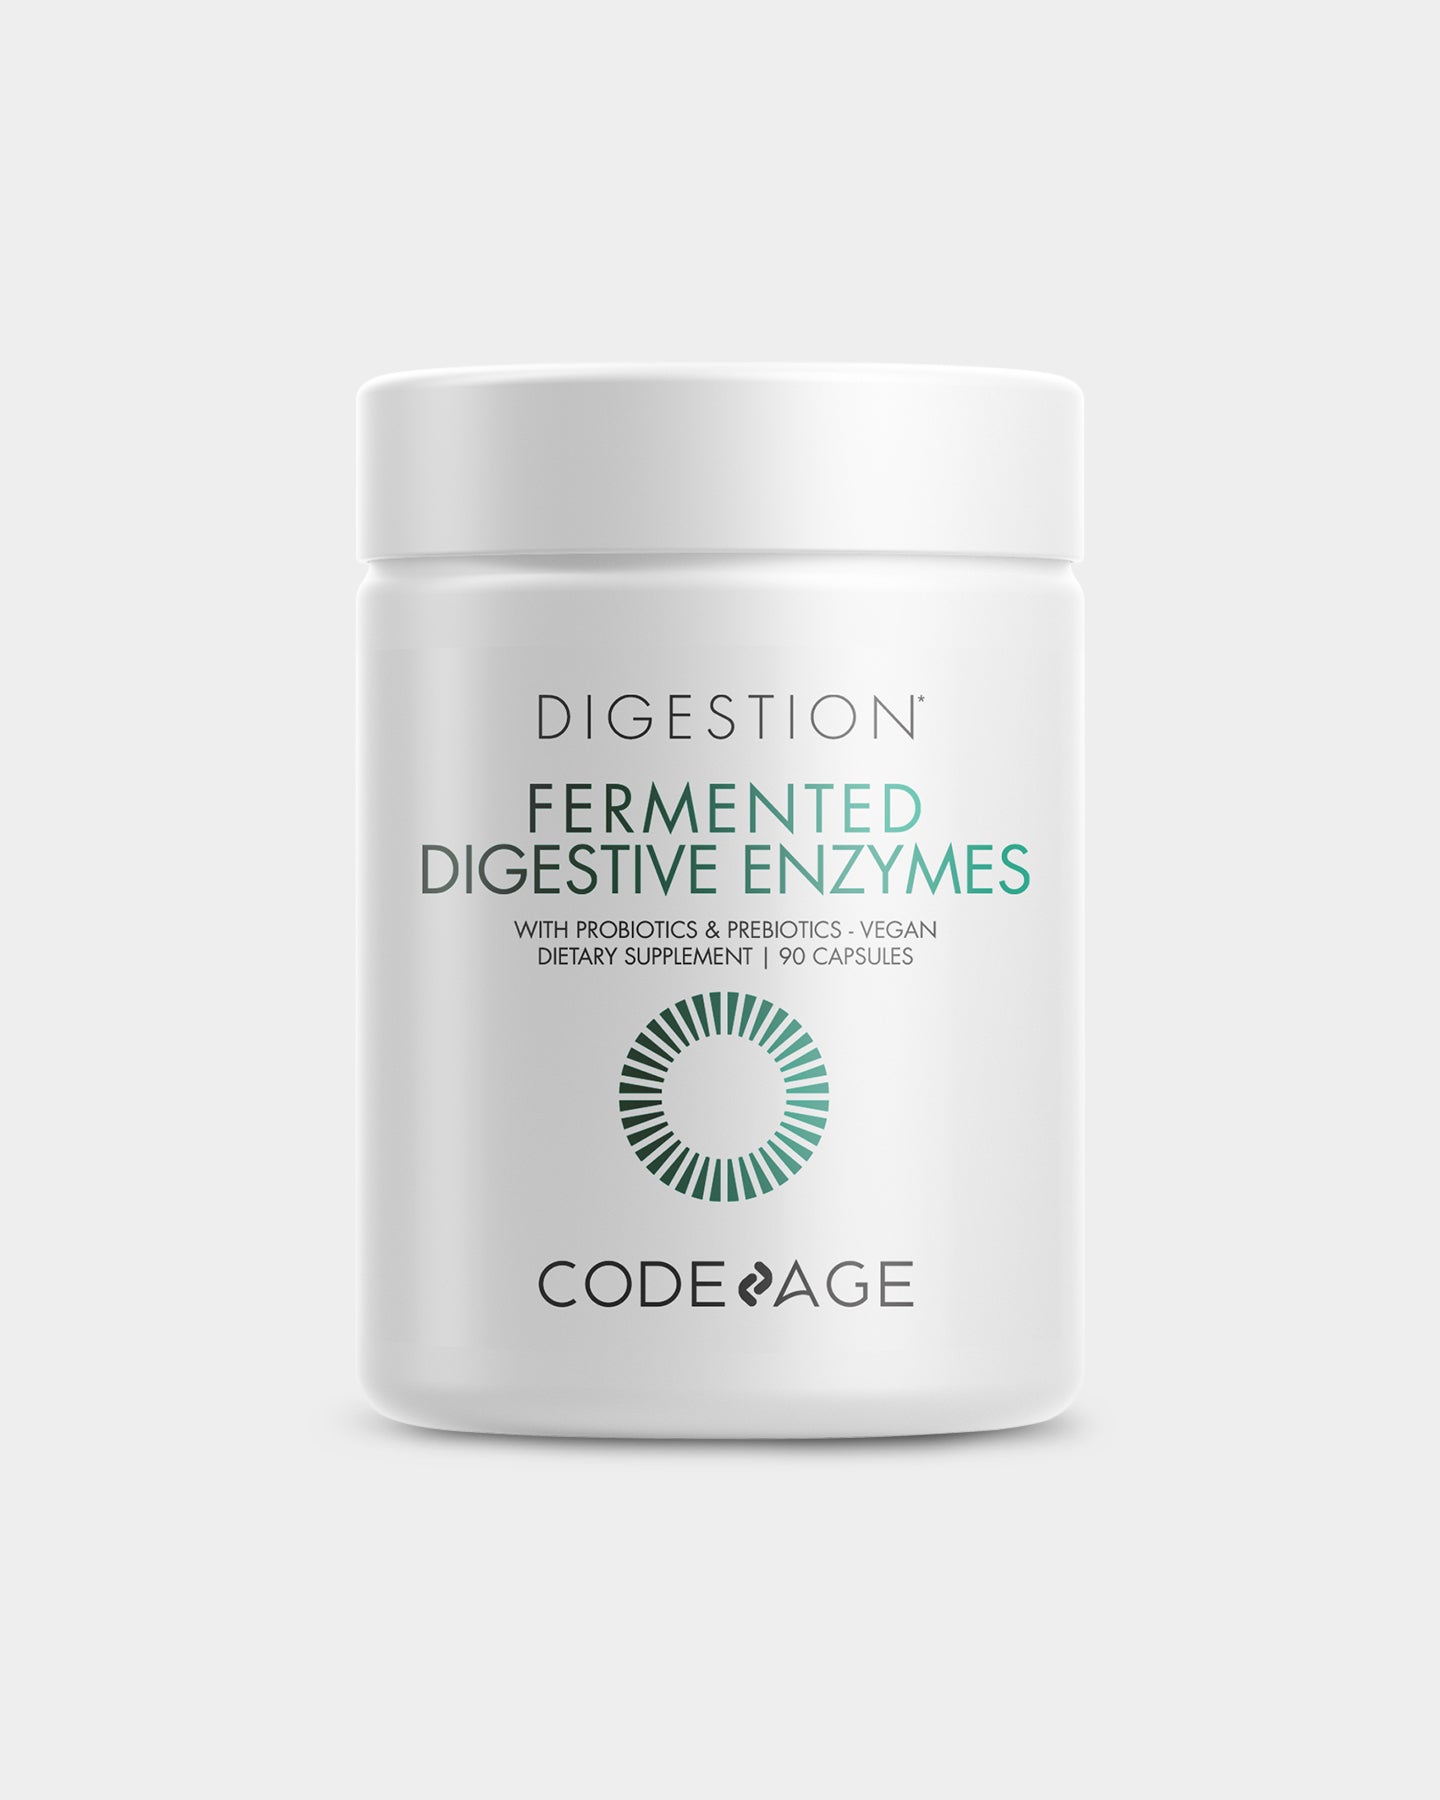 Codeage Digestion Fermented Digestive Enzymes Supplement Main